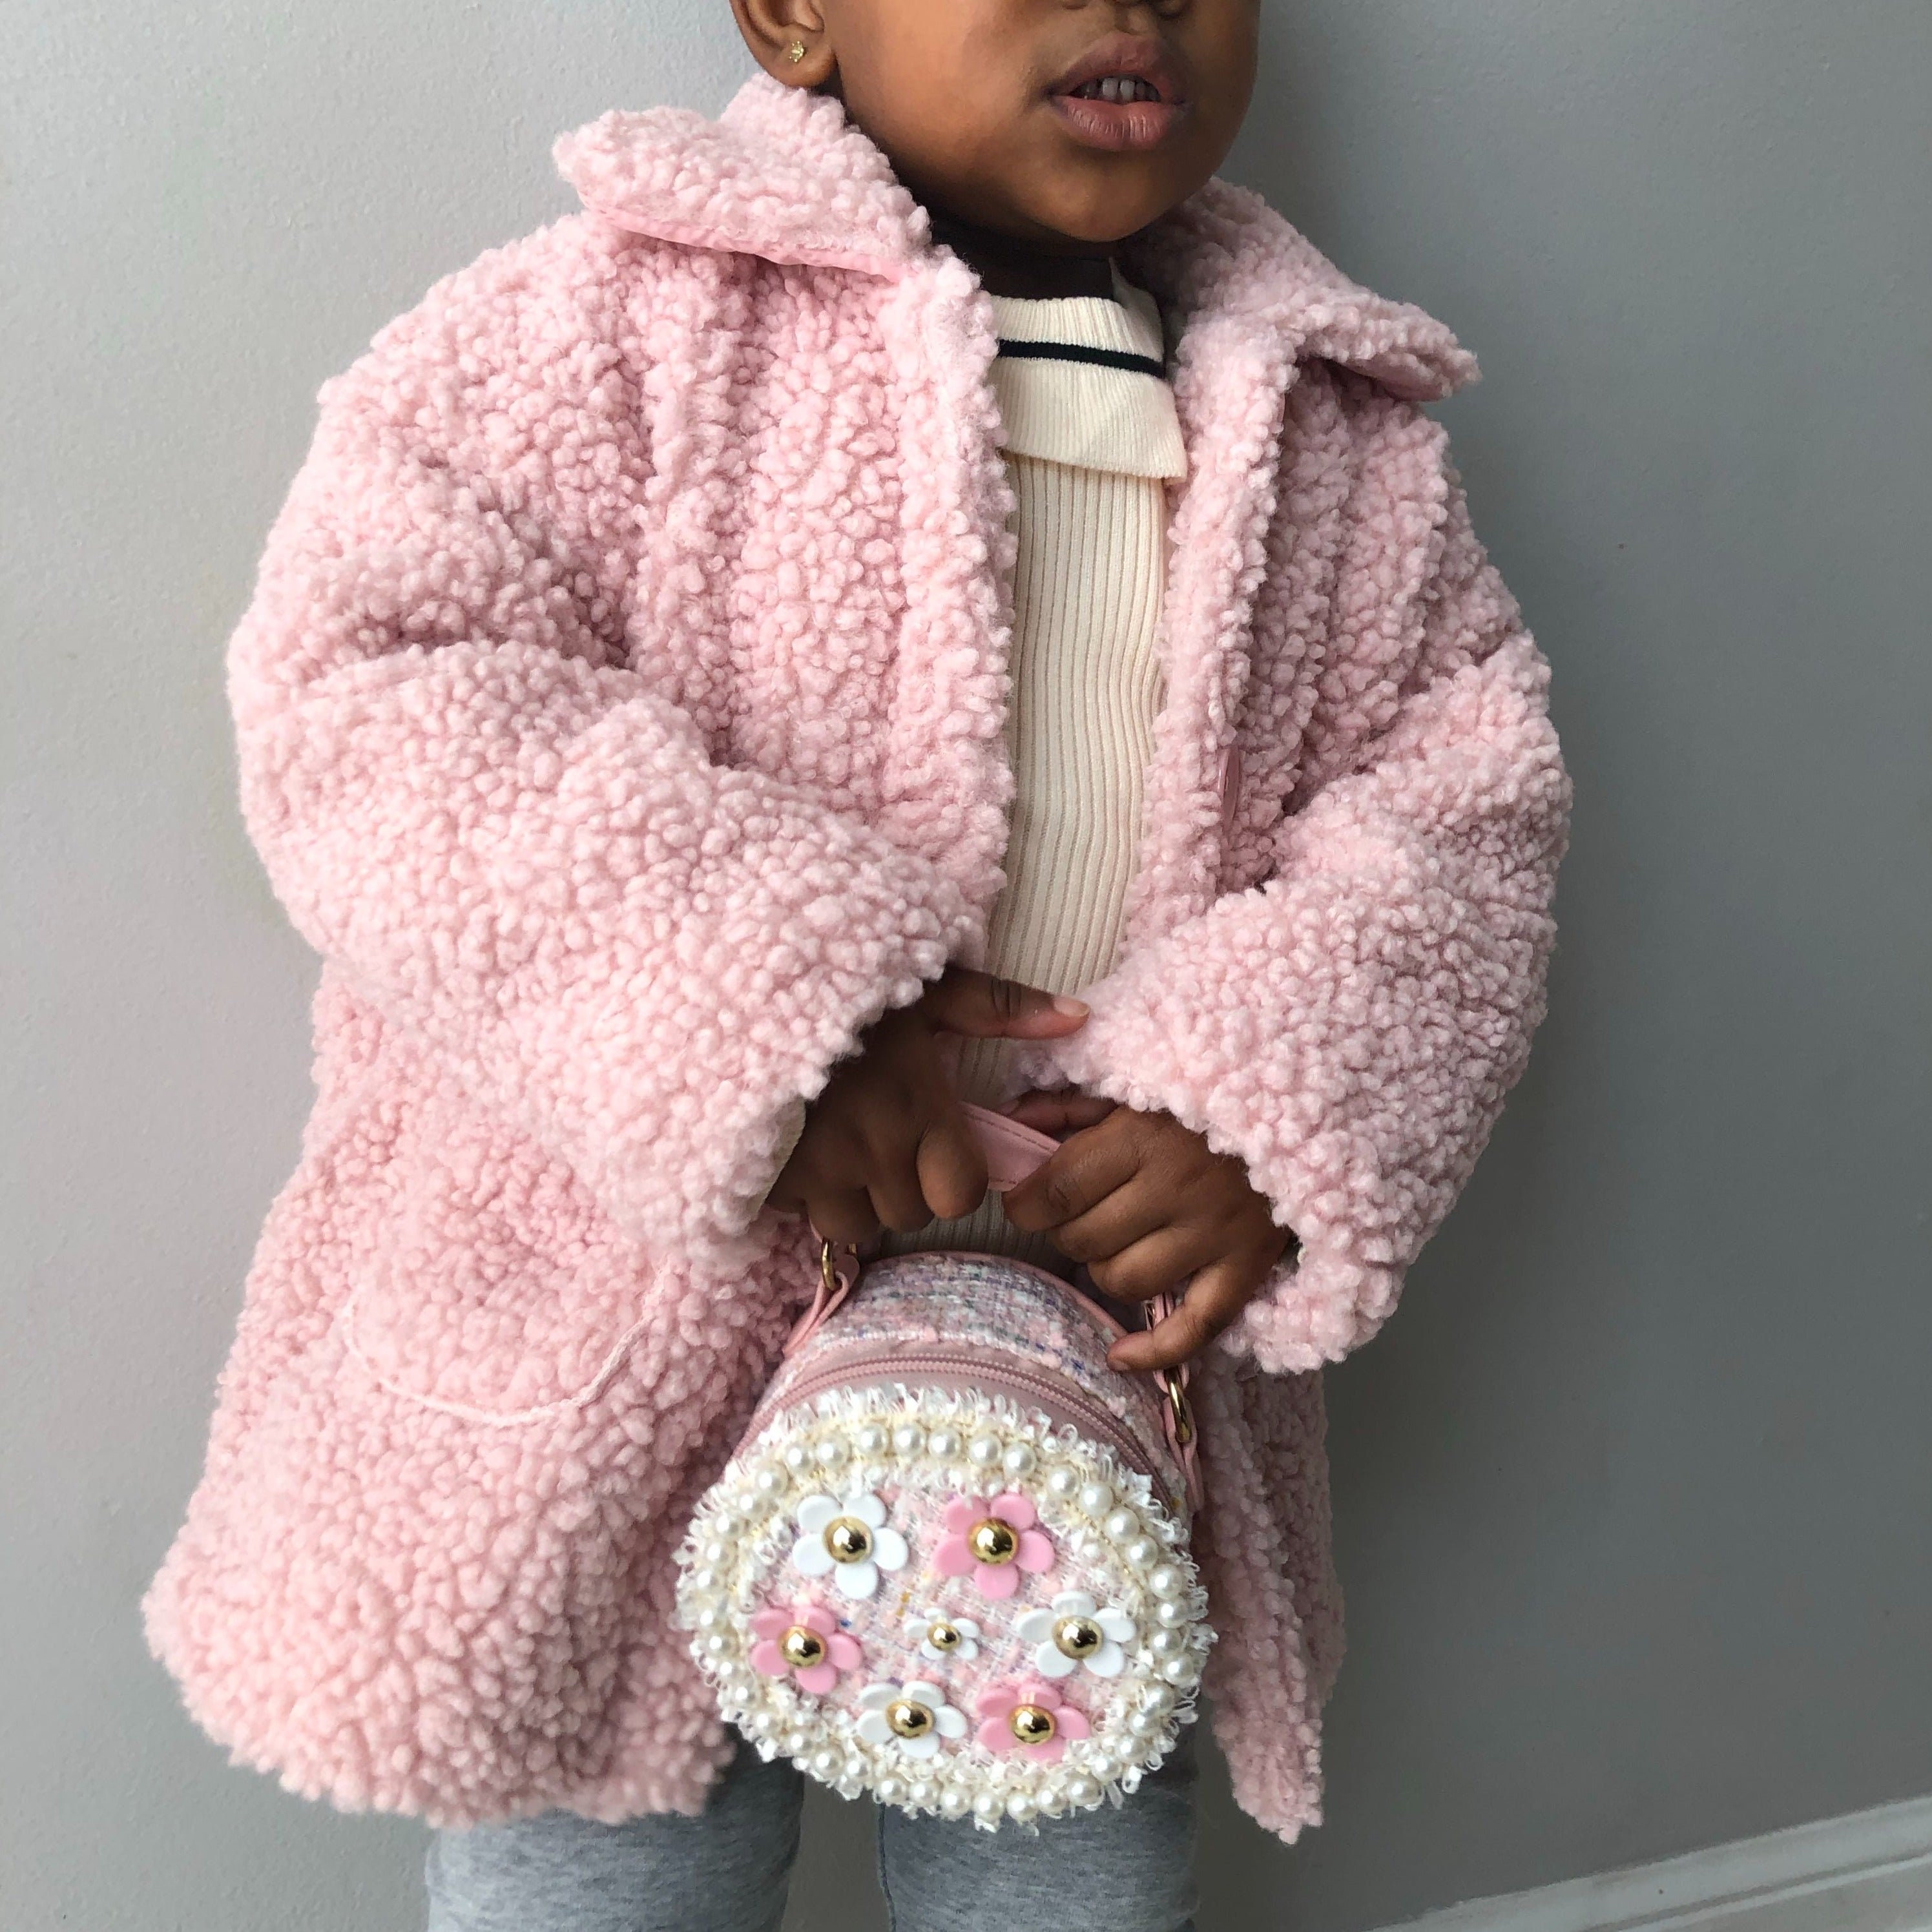  Girls Winter Fleece Coats Fashion White Faux Fur Warm Jacket  Toddler Girls Fuzzy Lightweight Fleece Outerwear Winter Clothes Baby Girls'  Outerwear Jackets & Coats(White,12-18 Months): Clothing, Shoes & Jewelry